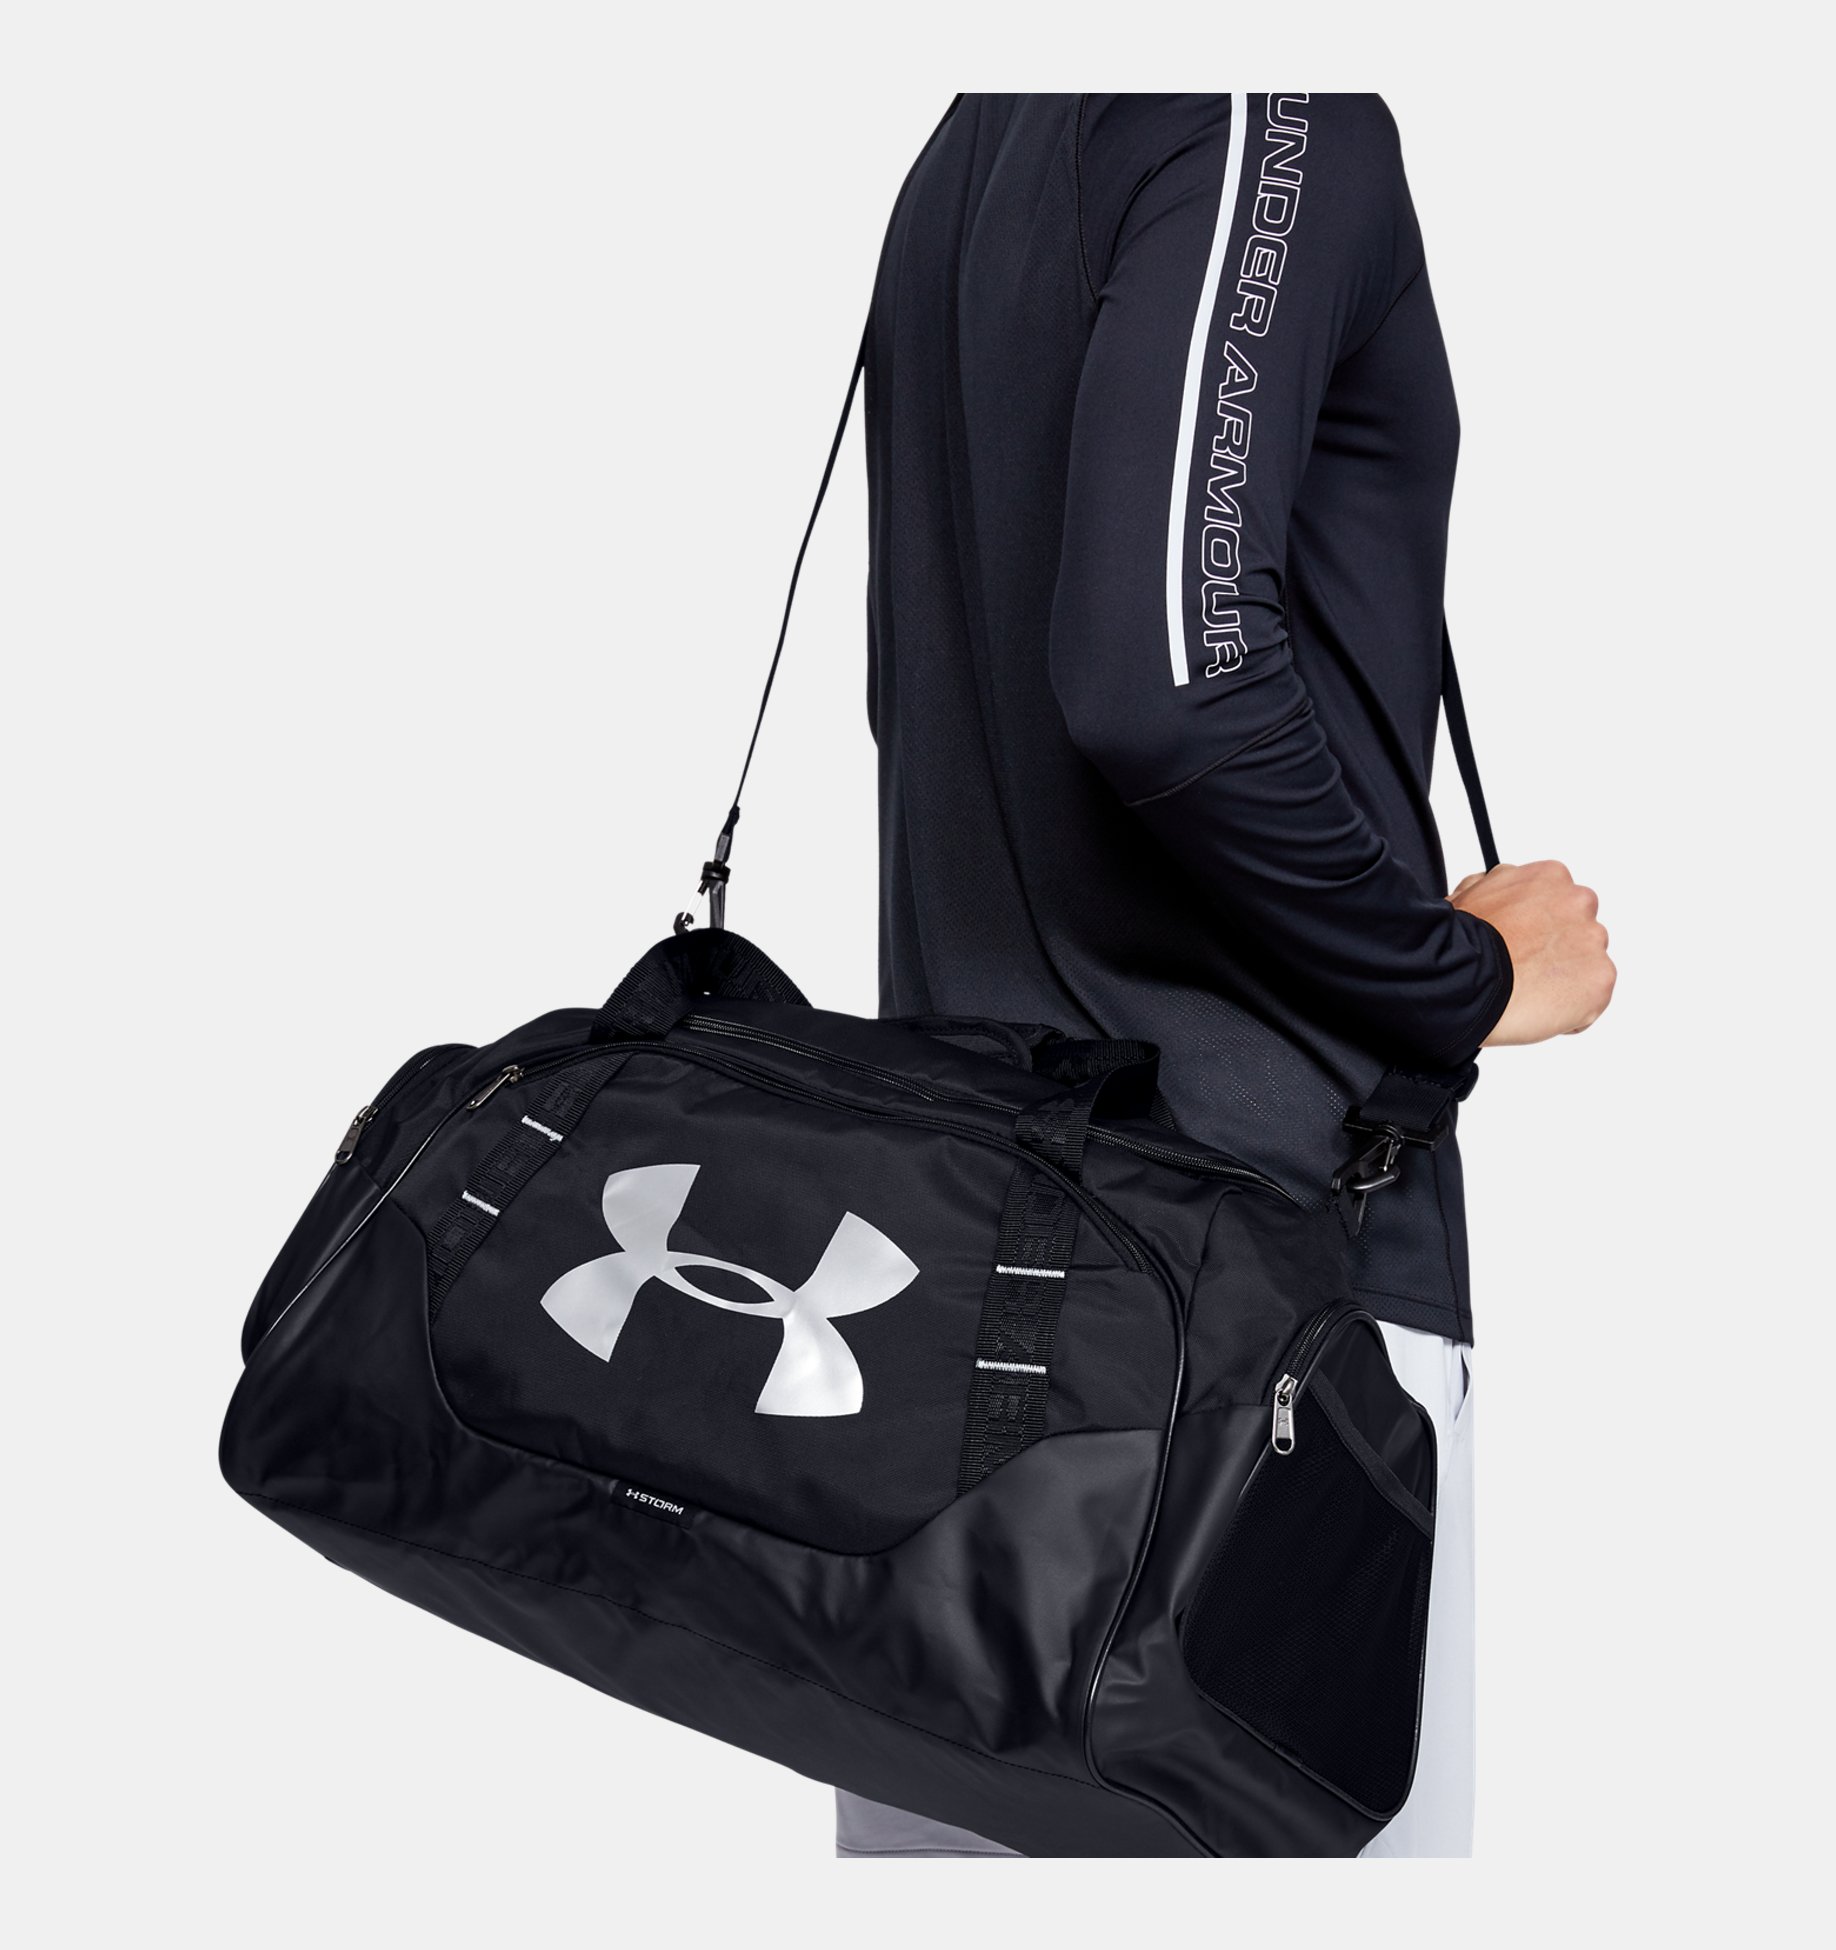 Under Armour Undeniable 3.0 Duffle Bag Small/Medium/Large Pick Size Color NEW 